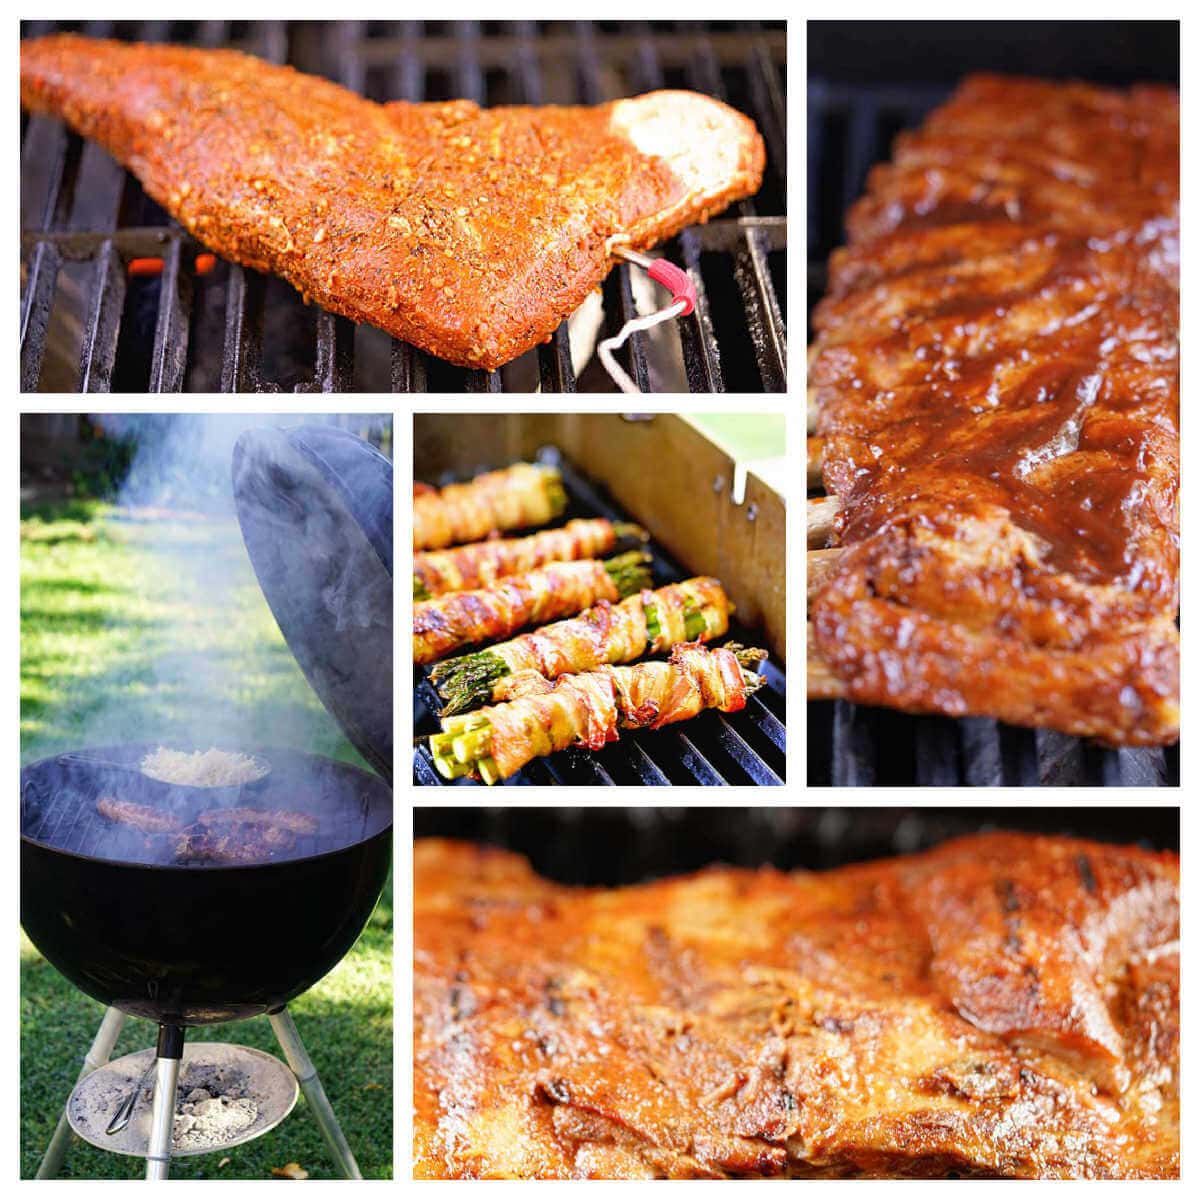 How to season the grill. Collage of photos of team and vegetables on the grill.